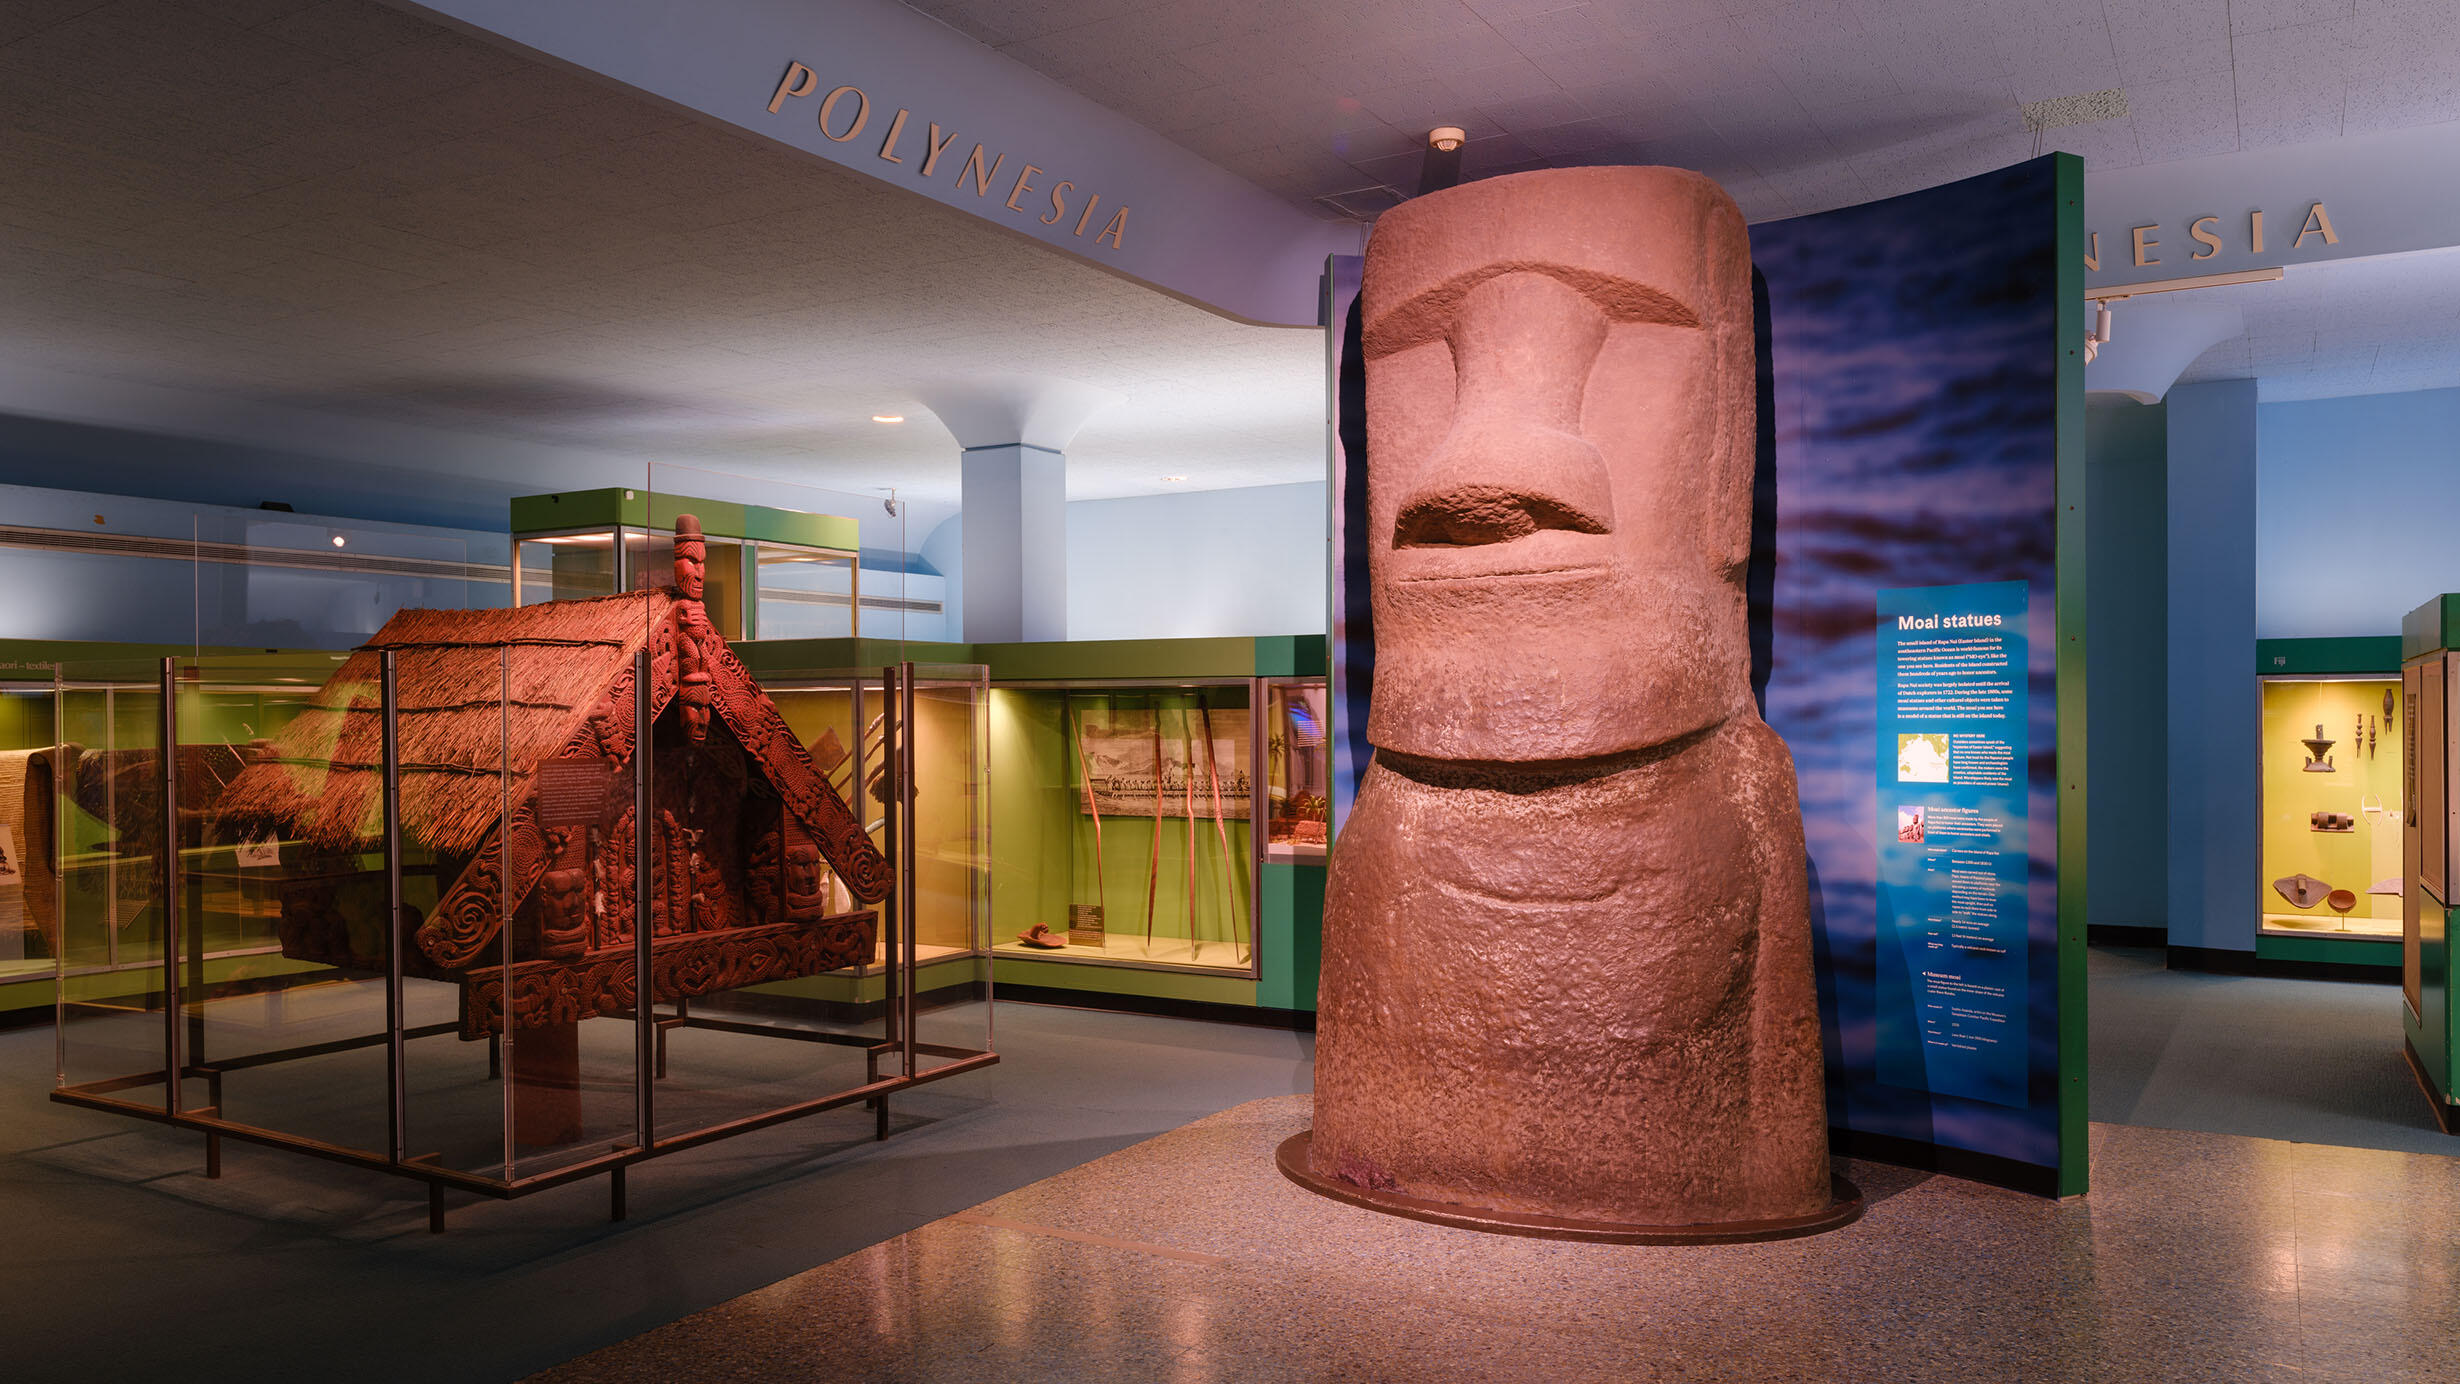 Moai statue in the center of the Hall of Pacific Peoples beside glass exhibit cases holding a Māori chief’s pātaka and other objects.